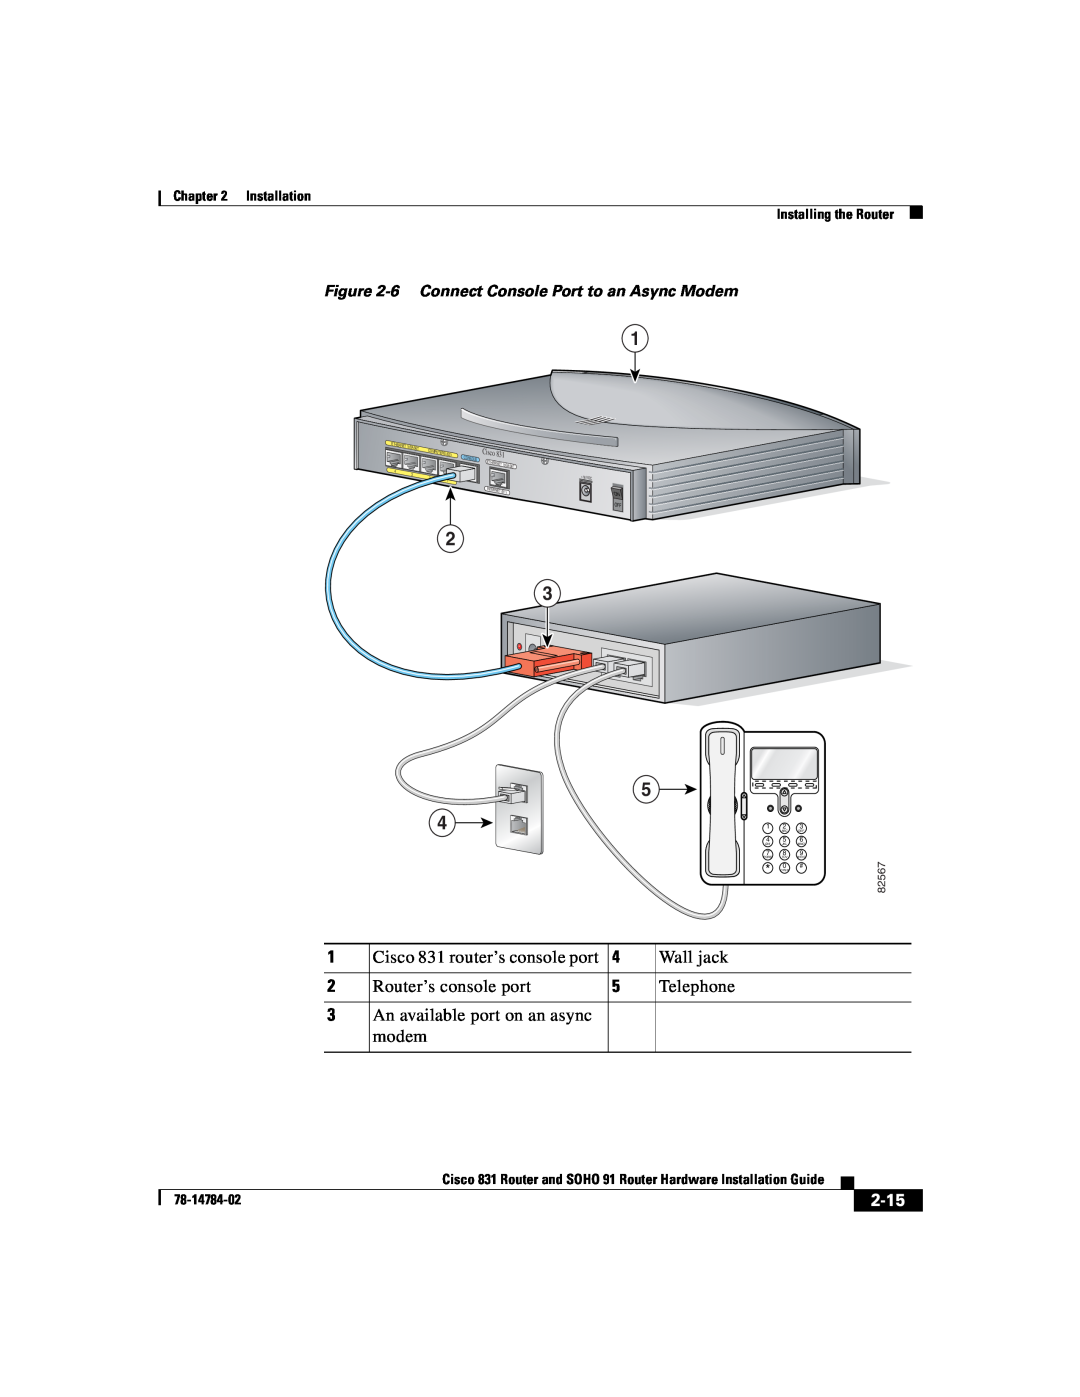 Cisco Systems 78-14784-02 2-15, 6 Connect Console Port to an Async Modem, Installation Installing the Router, 82567, Oper 